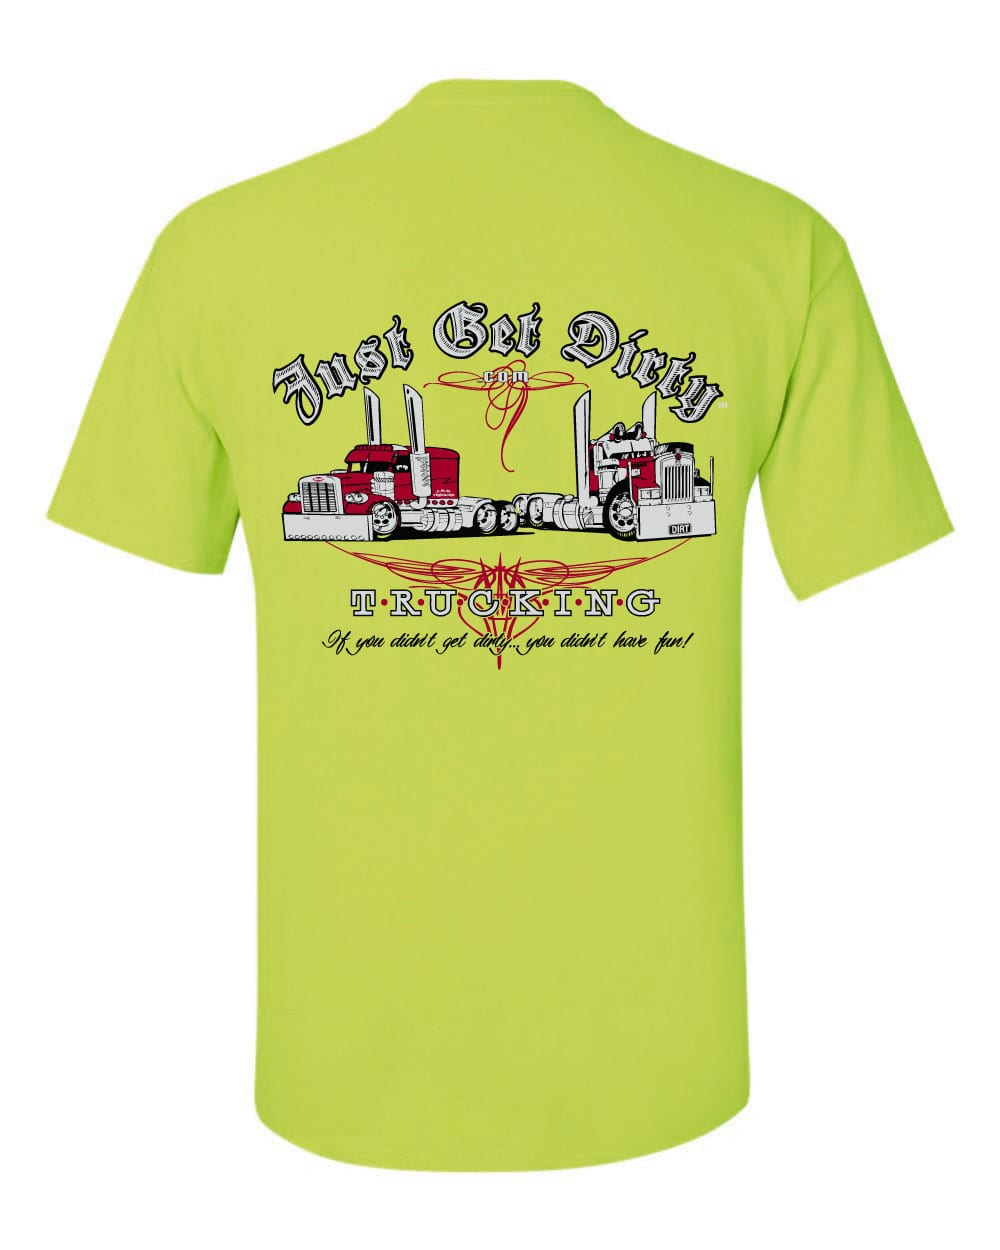 Just Get Dirty Gray Trucking T-shirt Gray, Navy, Safety Green